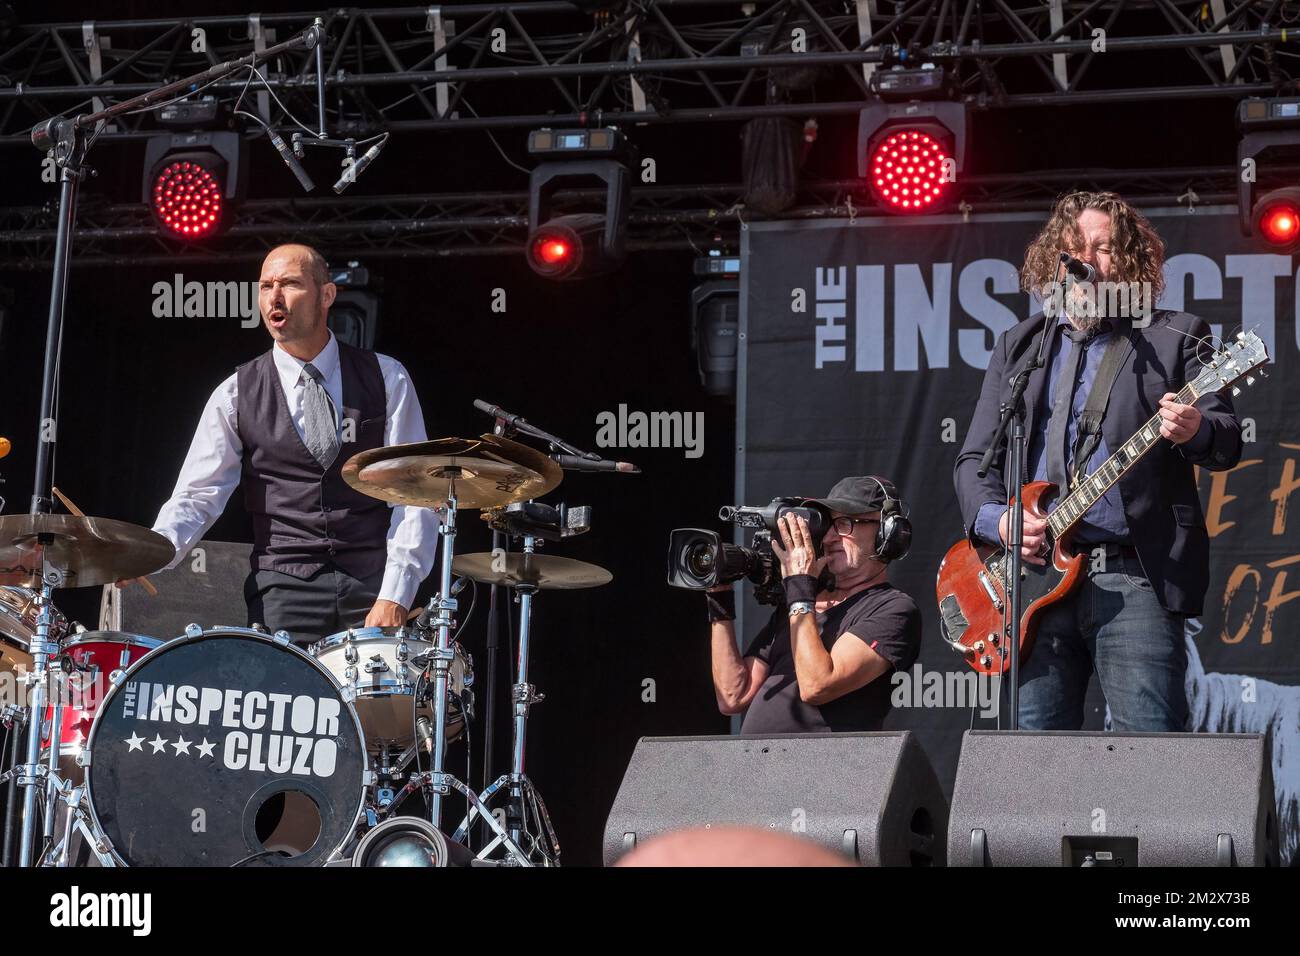 The singer / guitarist and the drummer of the rock band Inspector Cluzo on stage Stock Photo